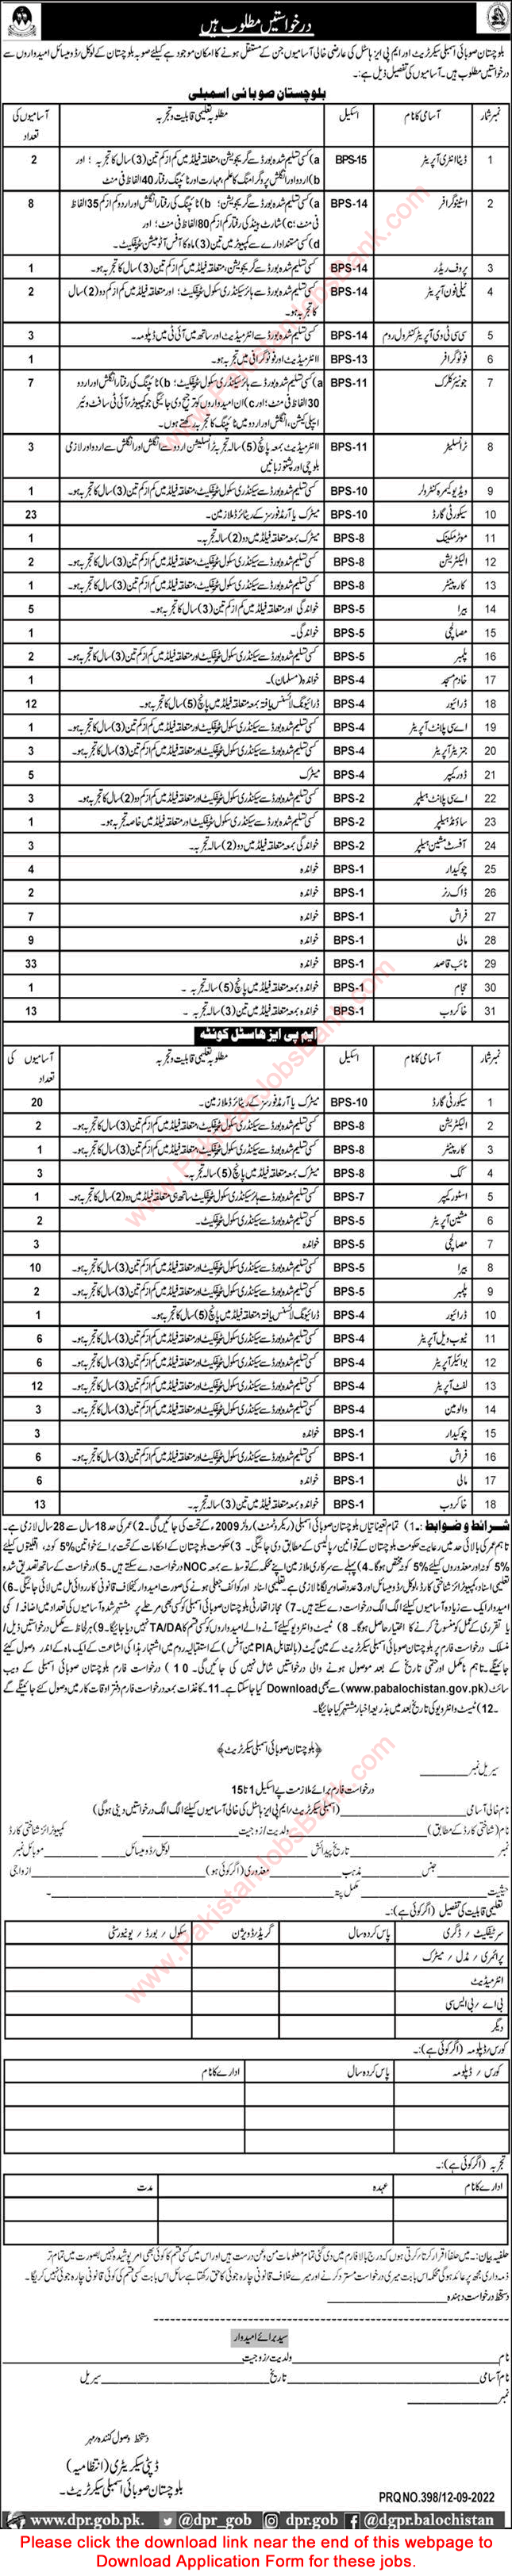 Balochistan Provincial Assembly Secretariat Jobs 2022 September Application Form Security Guards, Naib Qasid & Others Latest